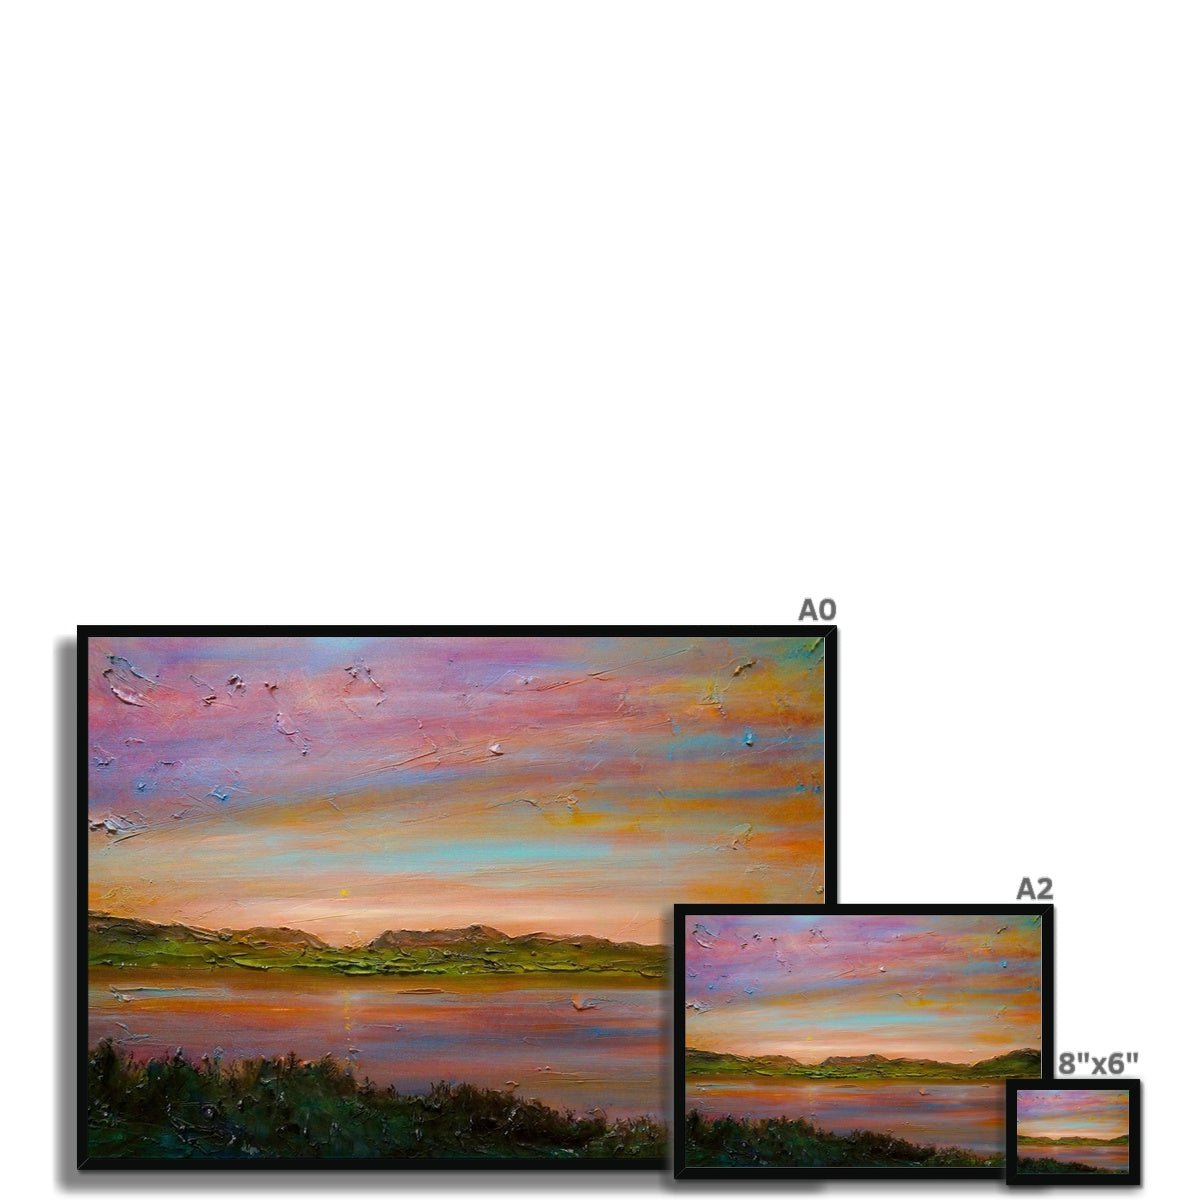 Gourock Golf Club Sunset Painting | Framed Prints From Scotland-Framed Prints-River Clyde Art Gallery-Paintings, Prints, Homeware, Art Gifts From Scotland By Scottish Artist Kevin Hunter